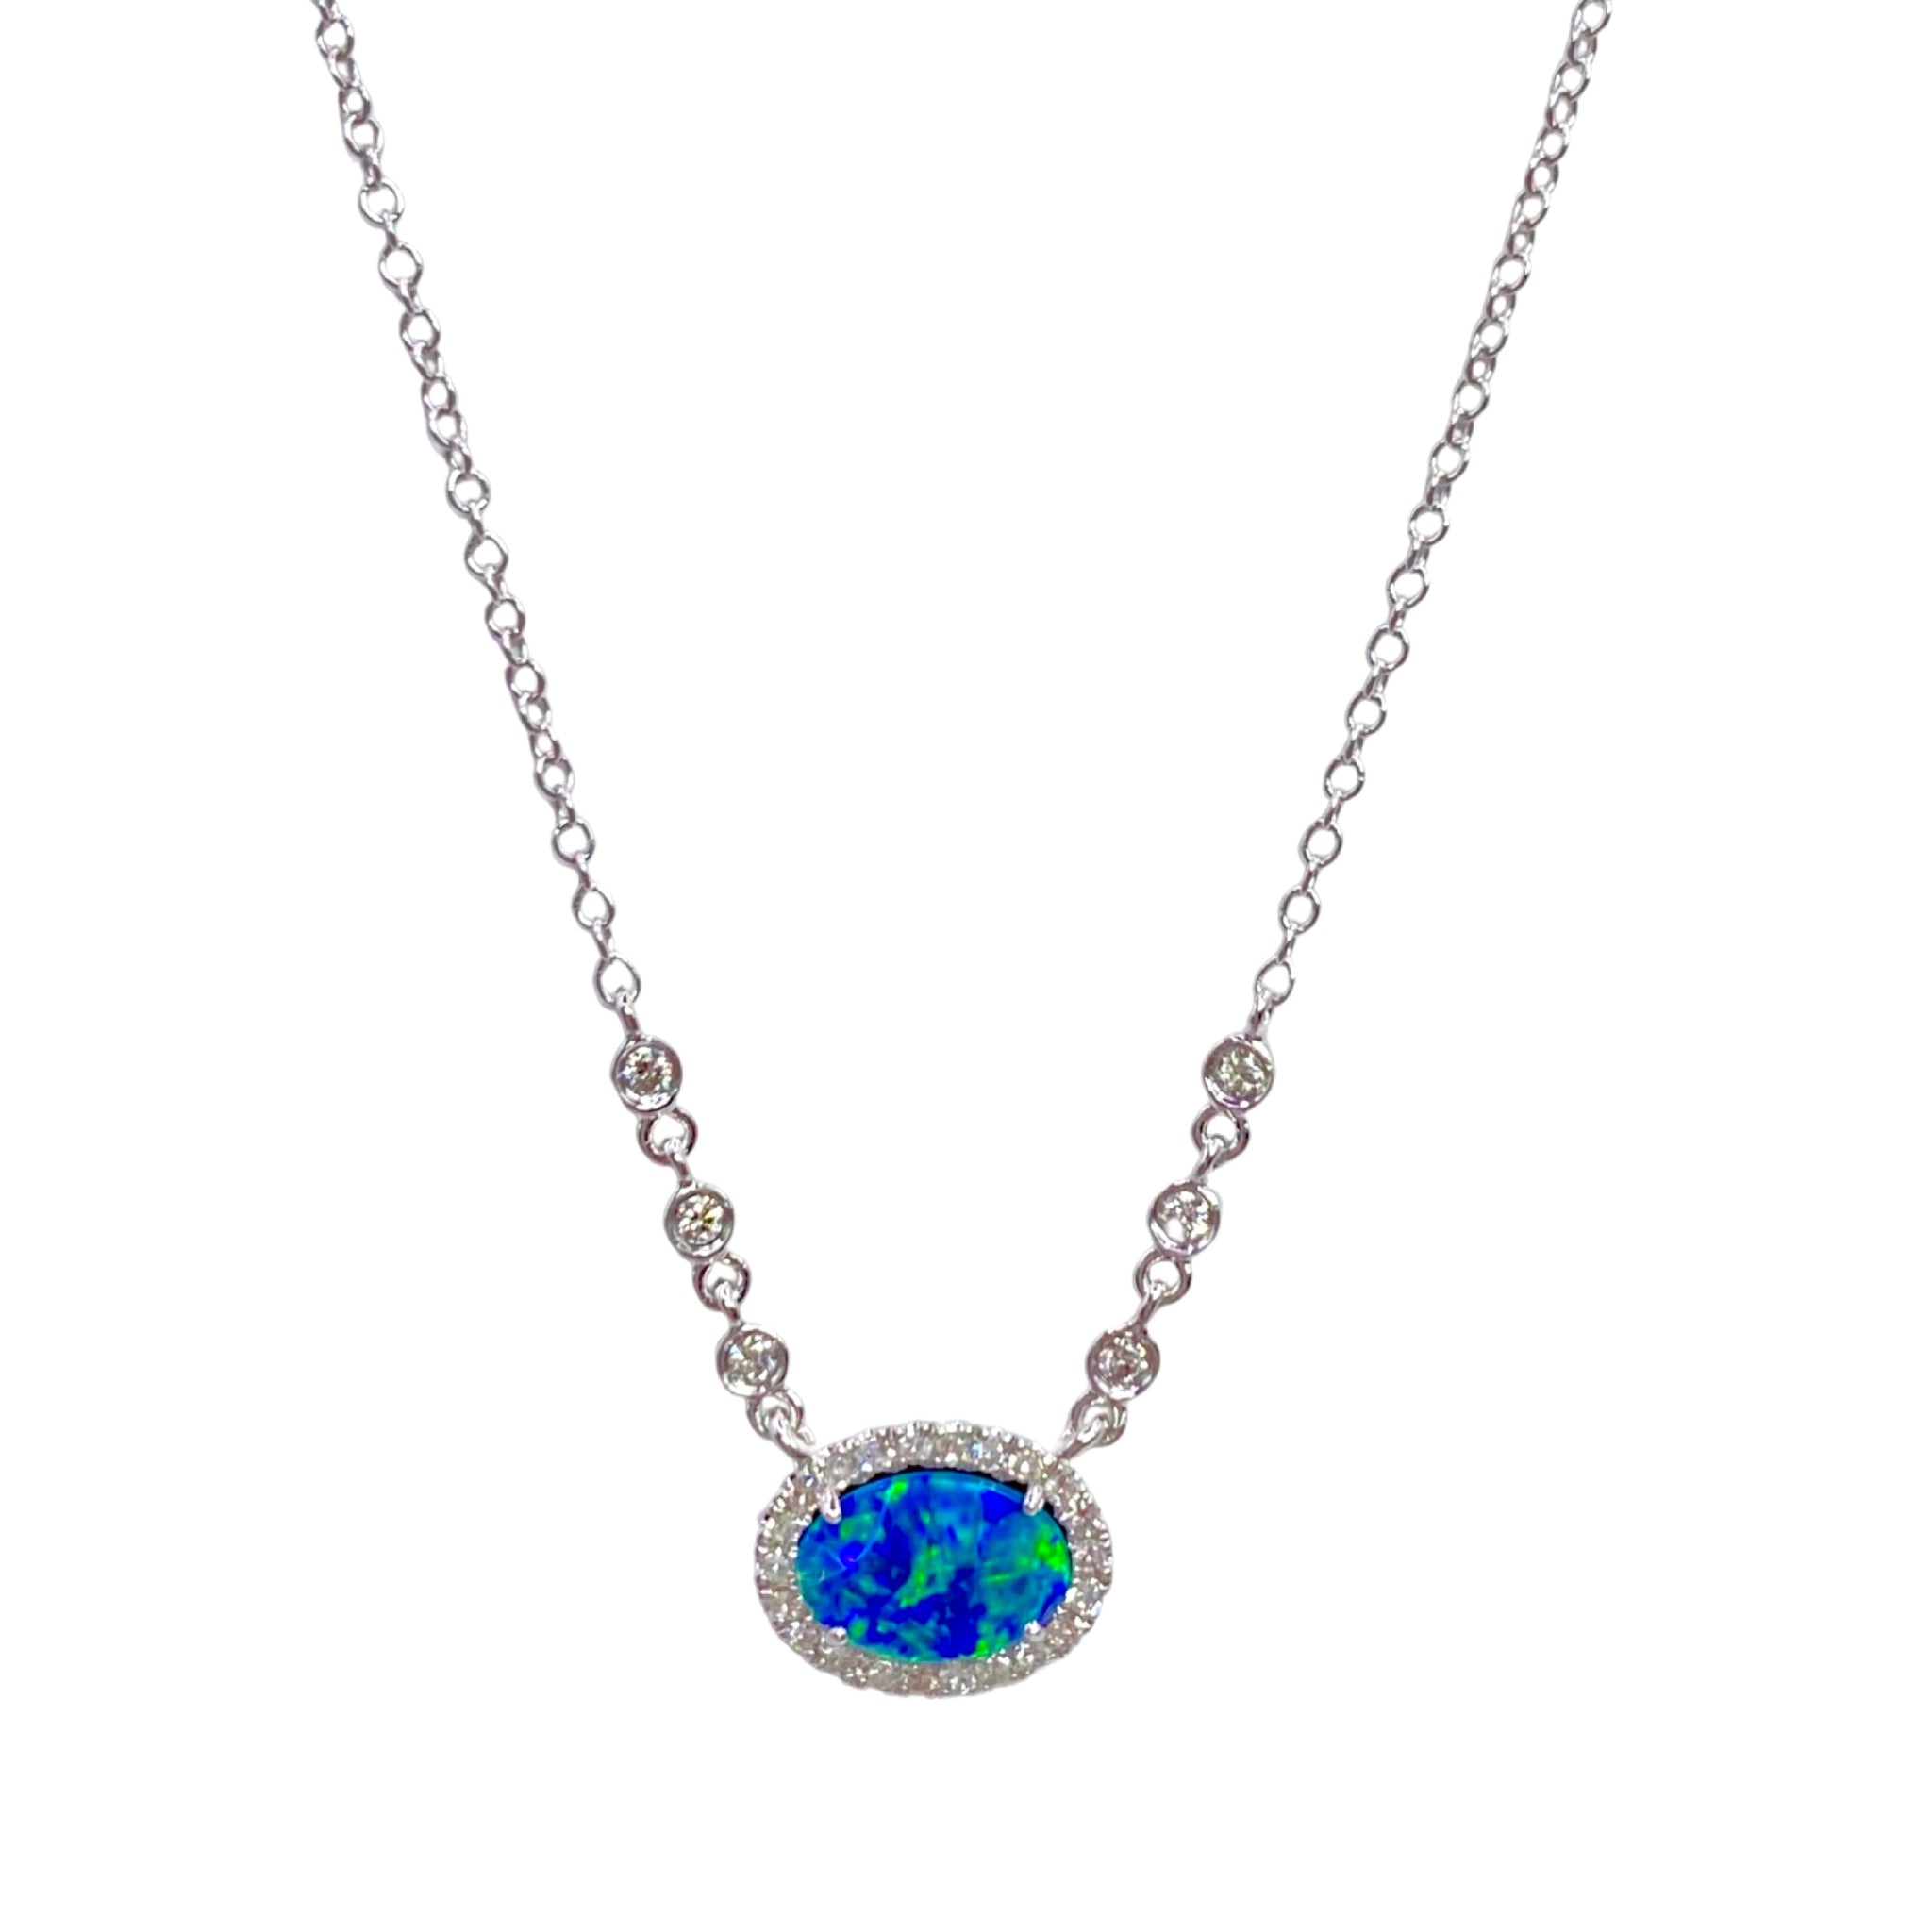 Meira T Opal & Diamond Necklace available at Shaylula Jewlery & Gifts in Tarrytown, NY and online. This beautiful blue opal pendant is surrounded by a halo of diamonds and has bright flashes of iridescent green. The pendant is flanked on both sides by three diamond stations on a white gold chain.  • 14k, .14 ct dia, .69 ct opal  • Lobster clasp